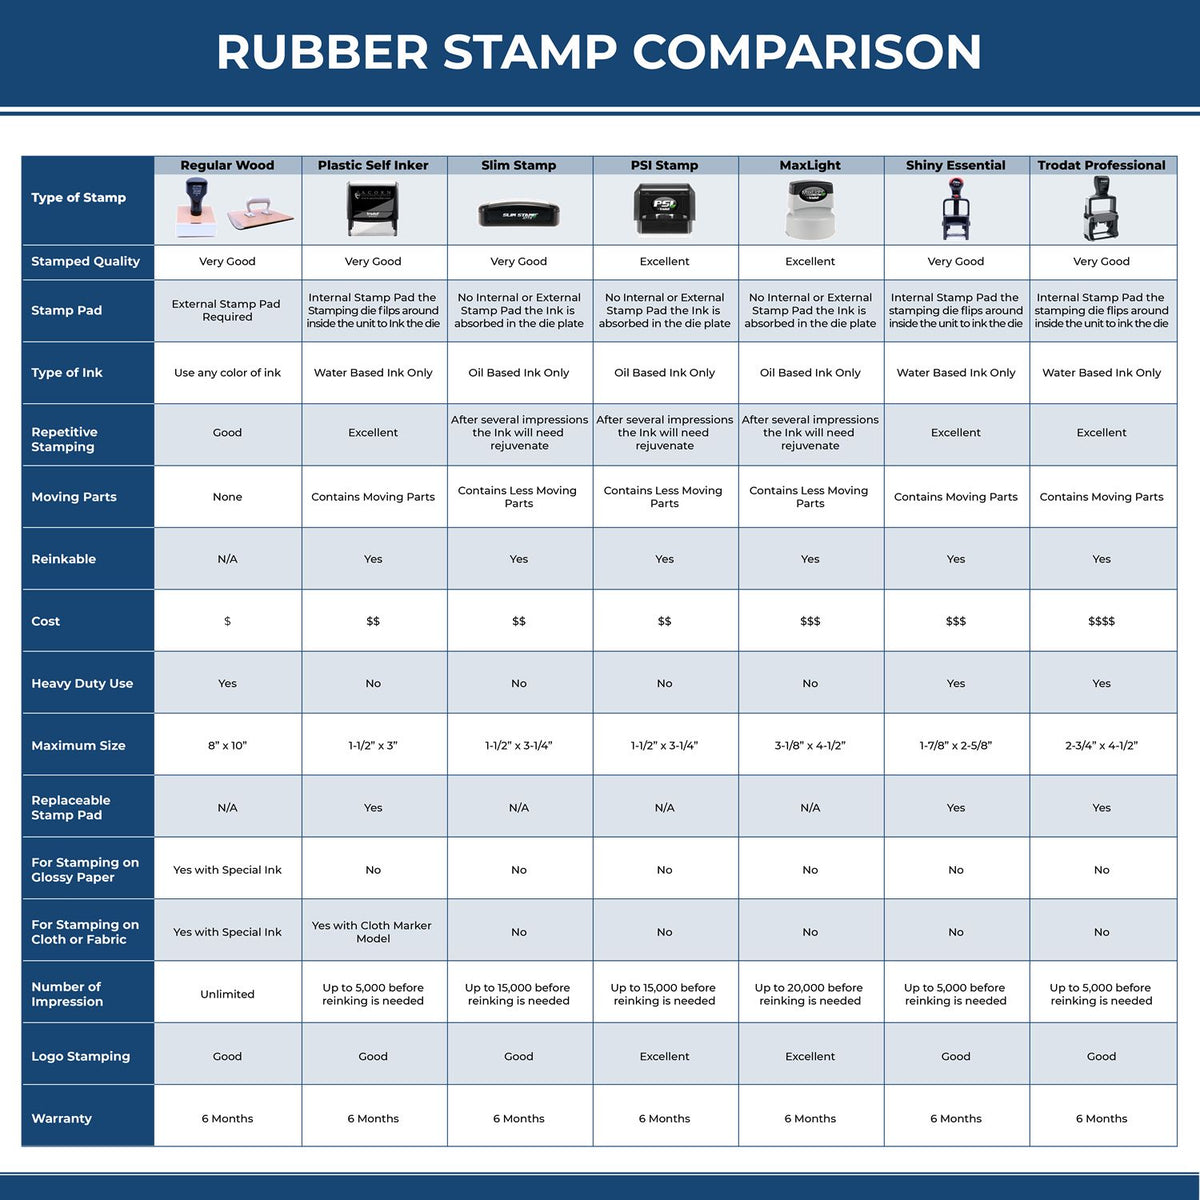 A comparison chart for the different types of mount models available for the Premium MaxLight Pre-Inked Nevada Landscape Architectural Stamp.